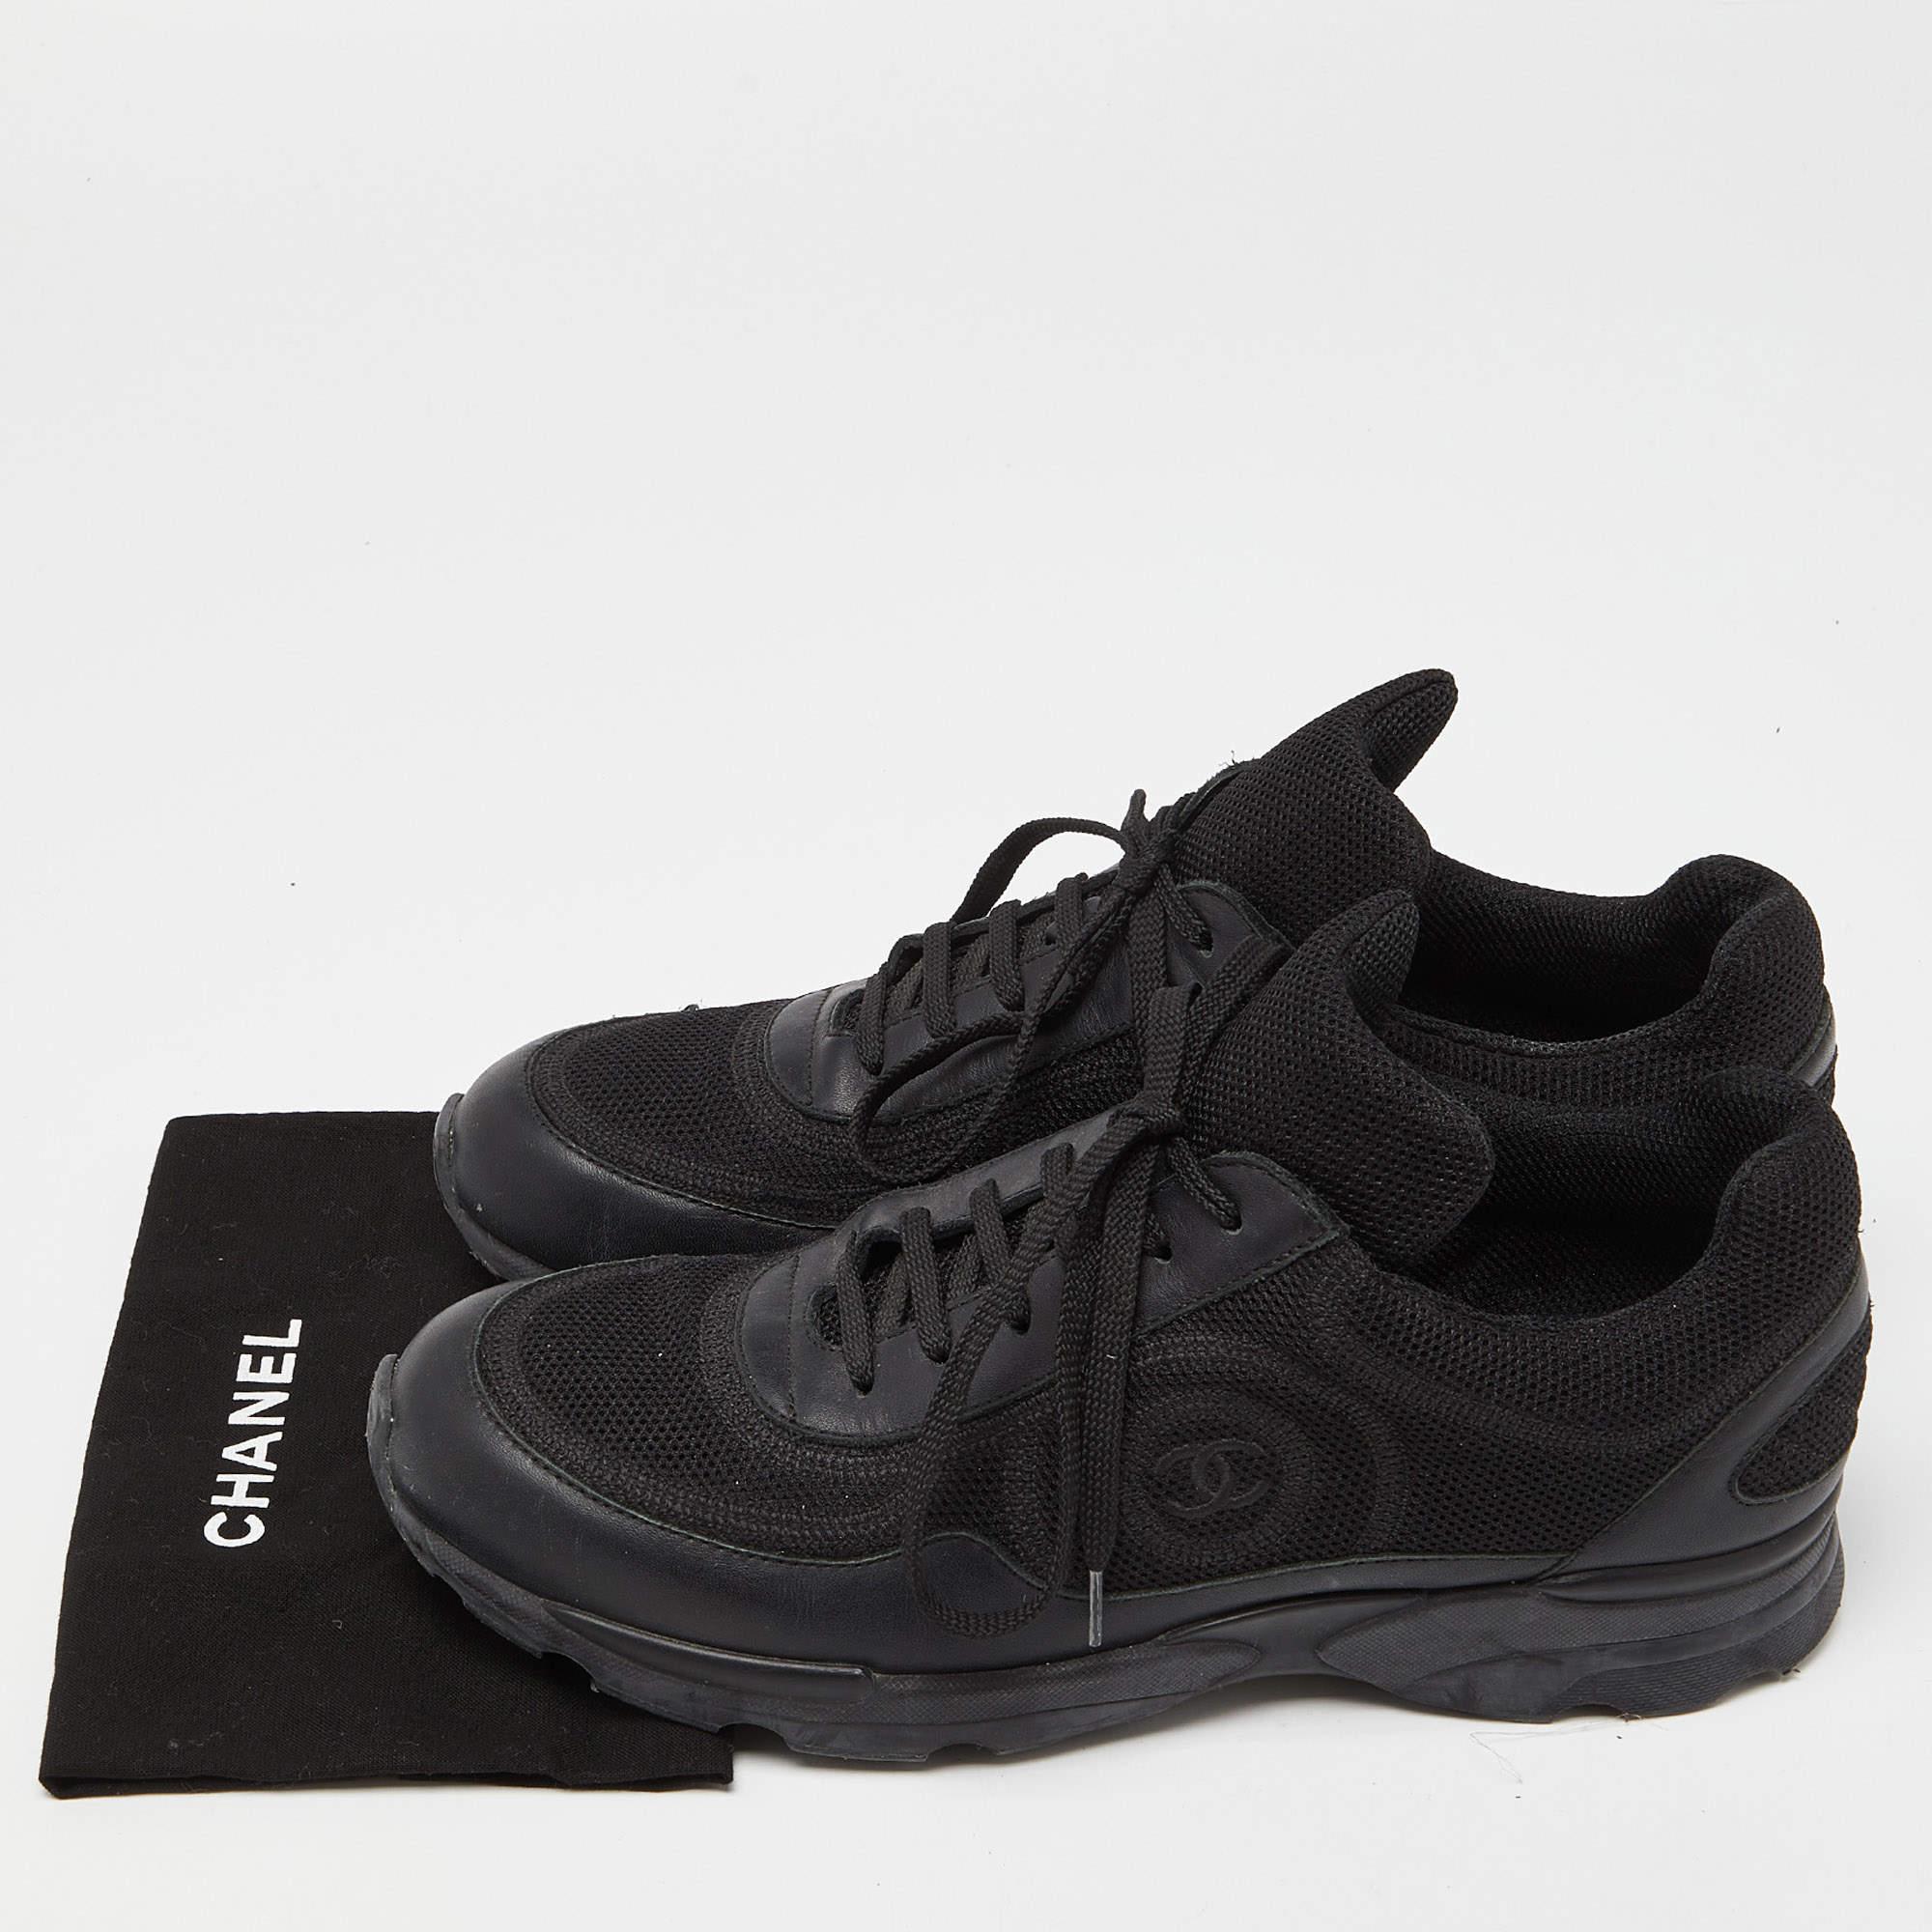 Chanel Black Mesh and Leather Low Top Sneakers Size 40.5 In Good Condition For Sale In Dubai, Al Qouz 2